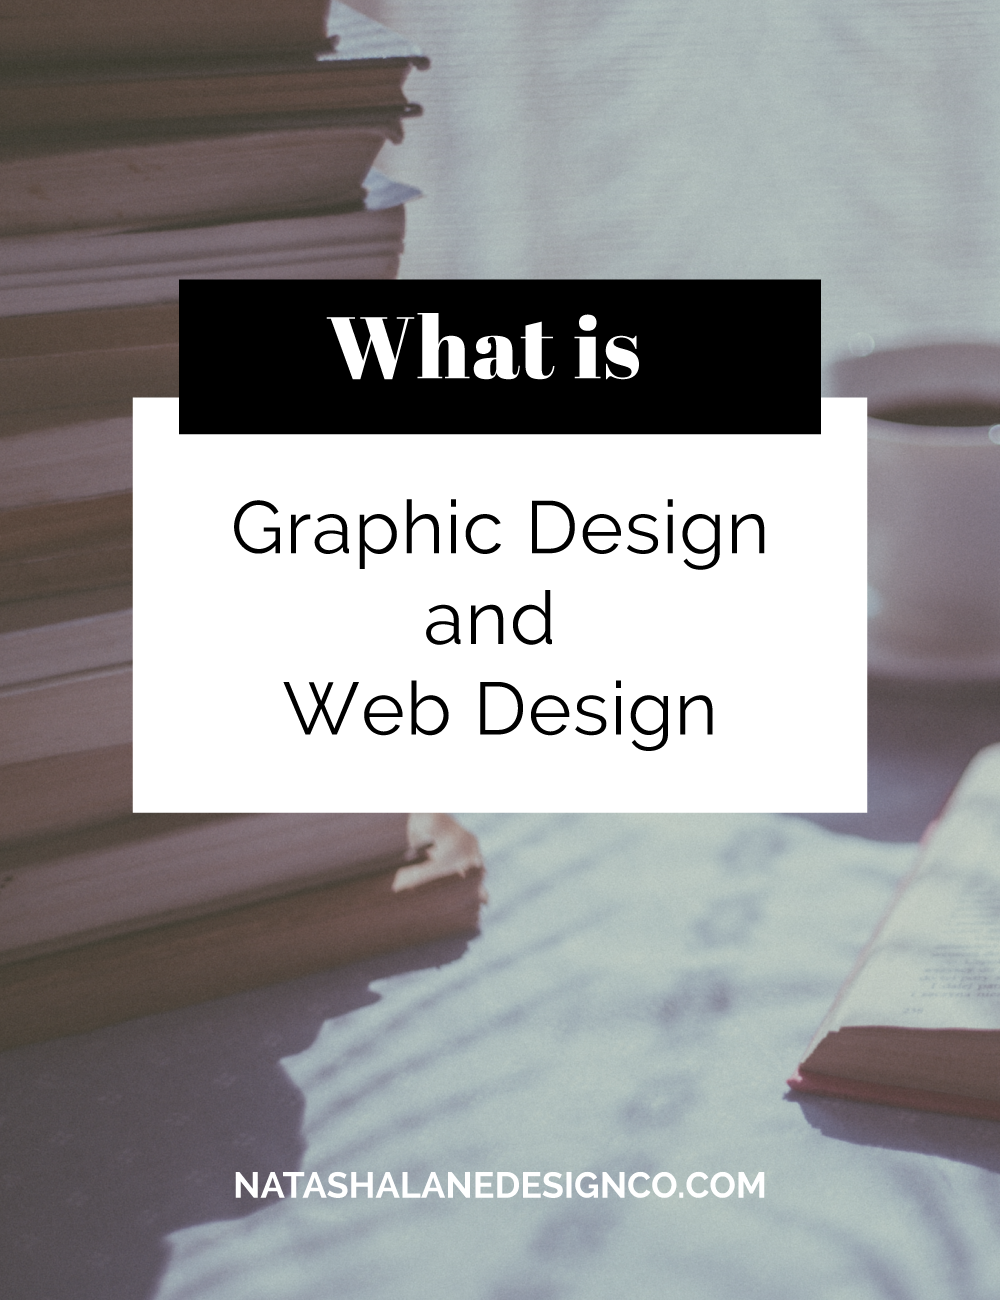 What is Graphic Design and Web Design?